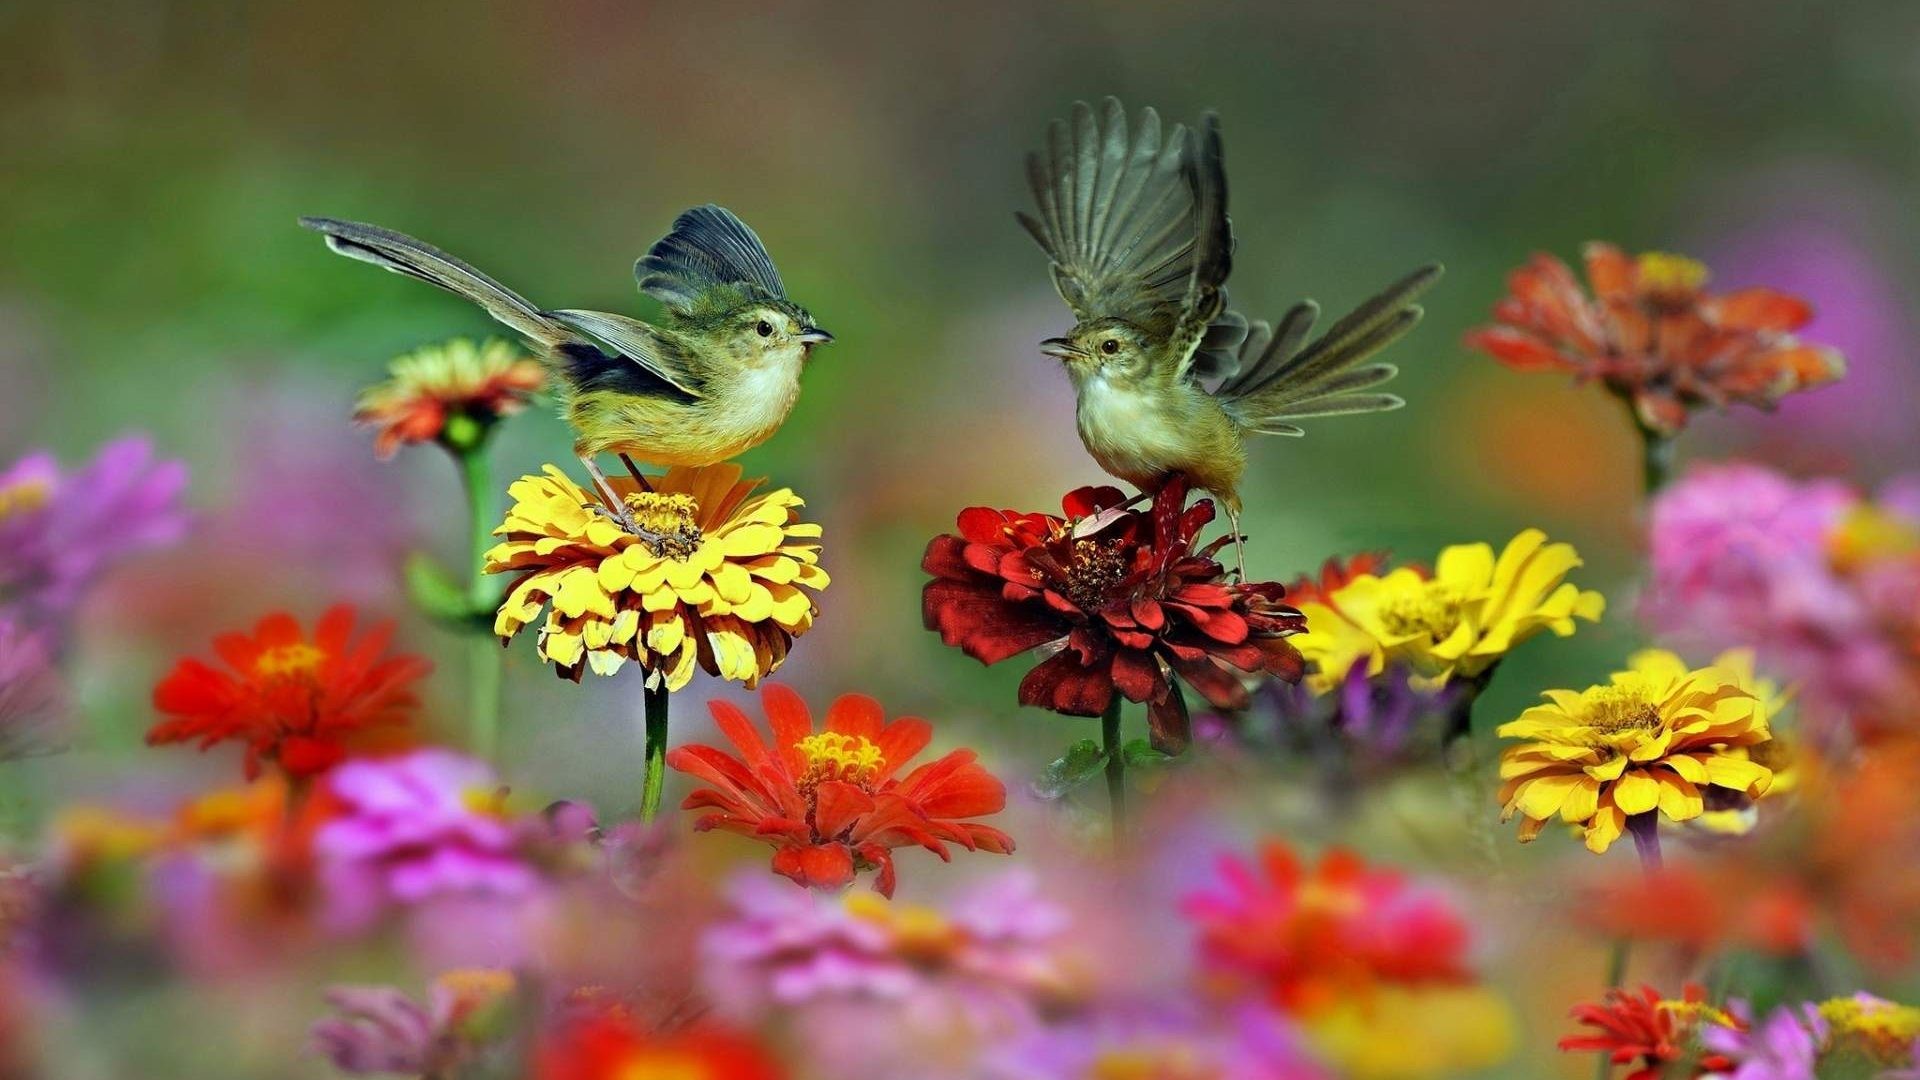 1920x1080 Tiny Birds and Flowers Wallpaper